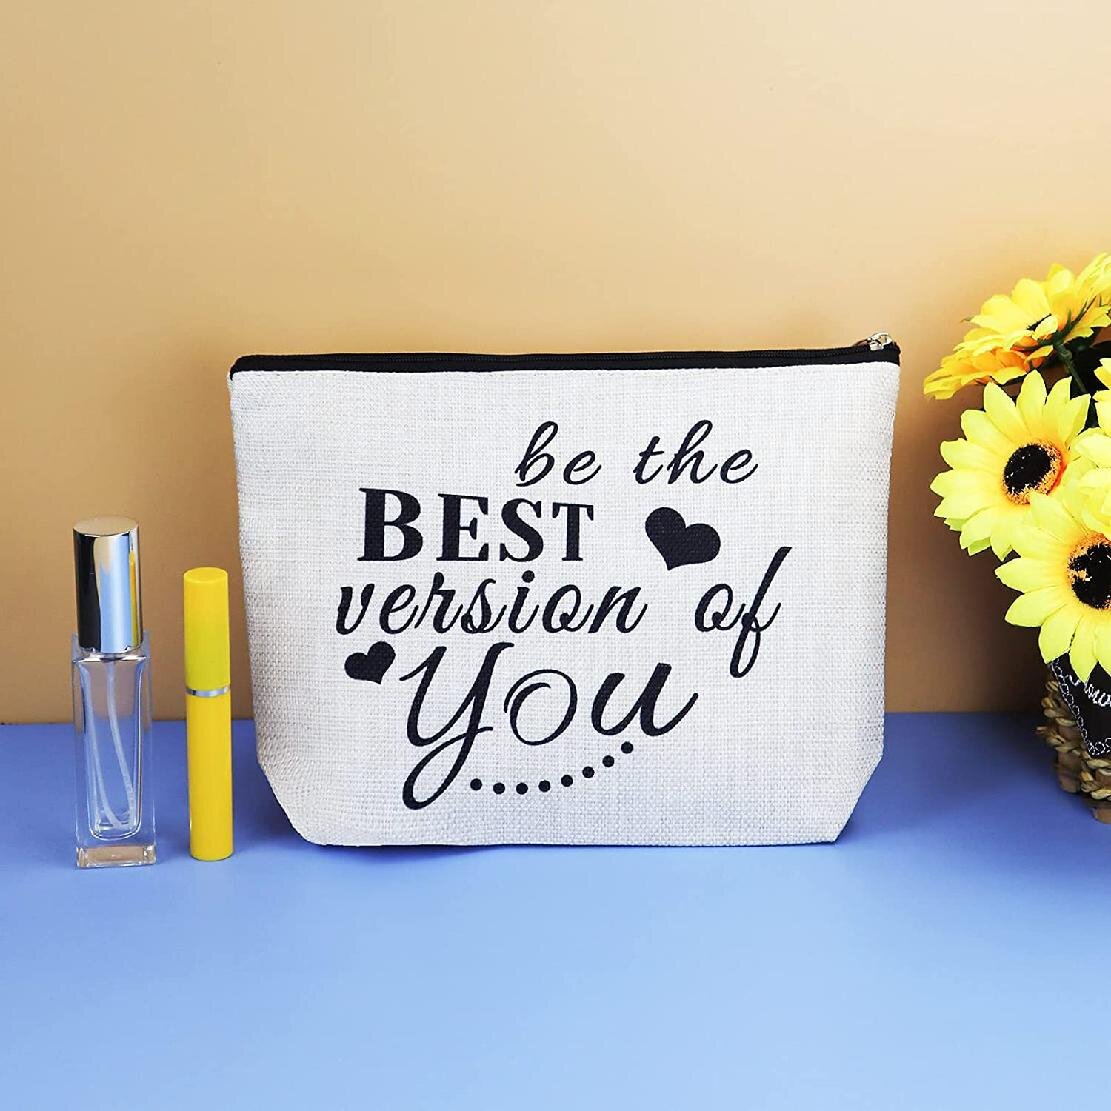 Daughter Girls Friend BFF Motivational Gifts for Women- Spread Kindness Teens Positive Inspirational Quotes Makeup Bag Inspirational Gifts for Women Uplifting Encouragement Gifts for Women 